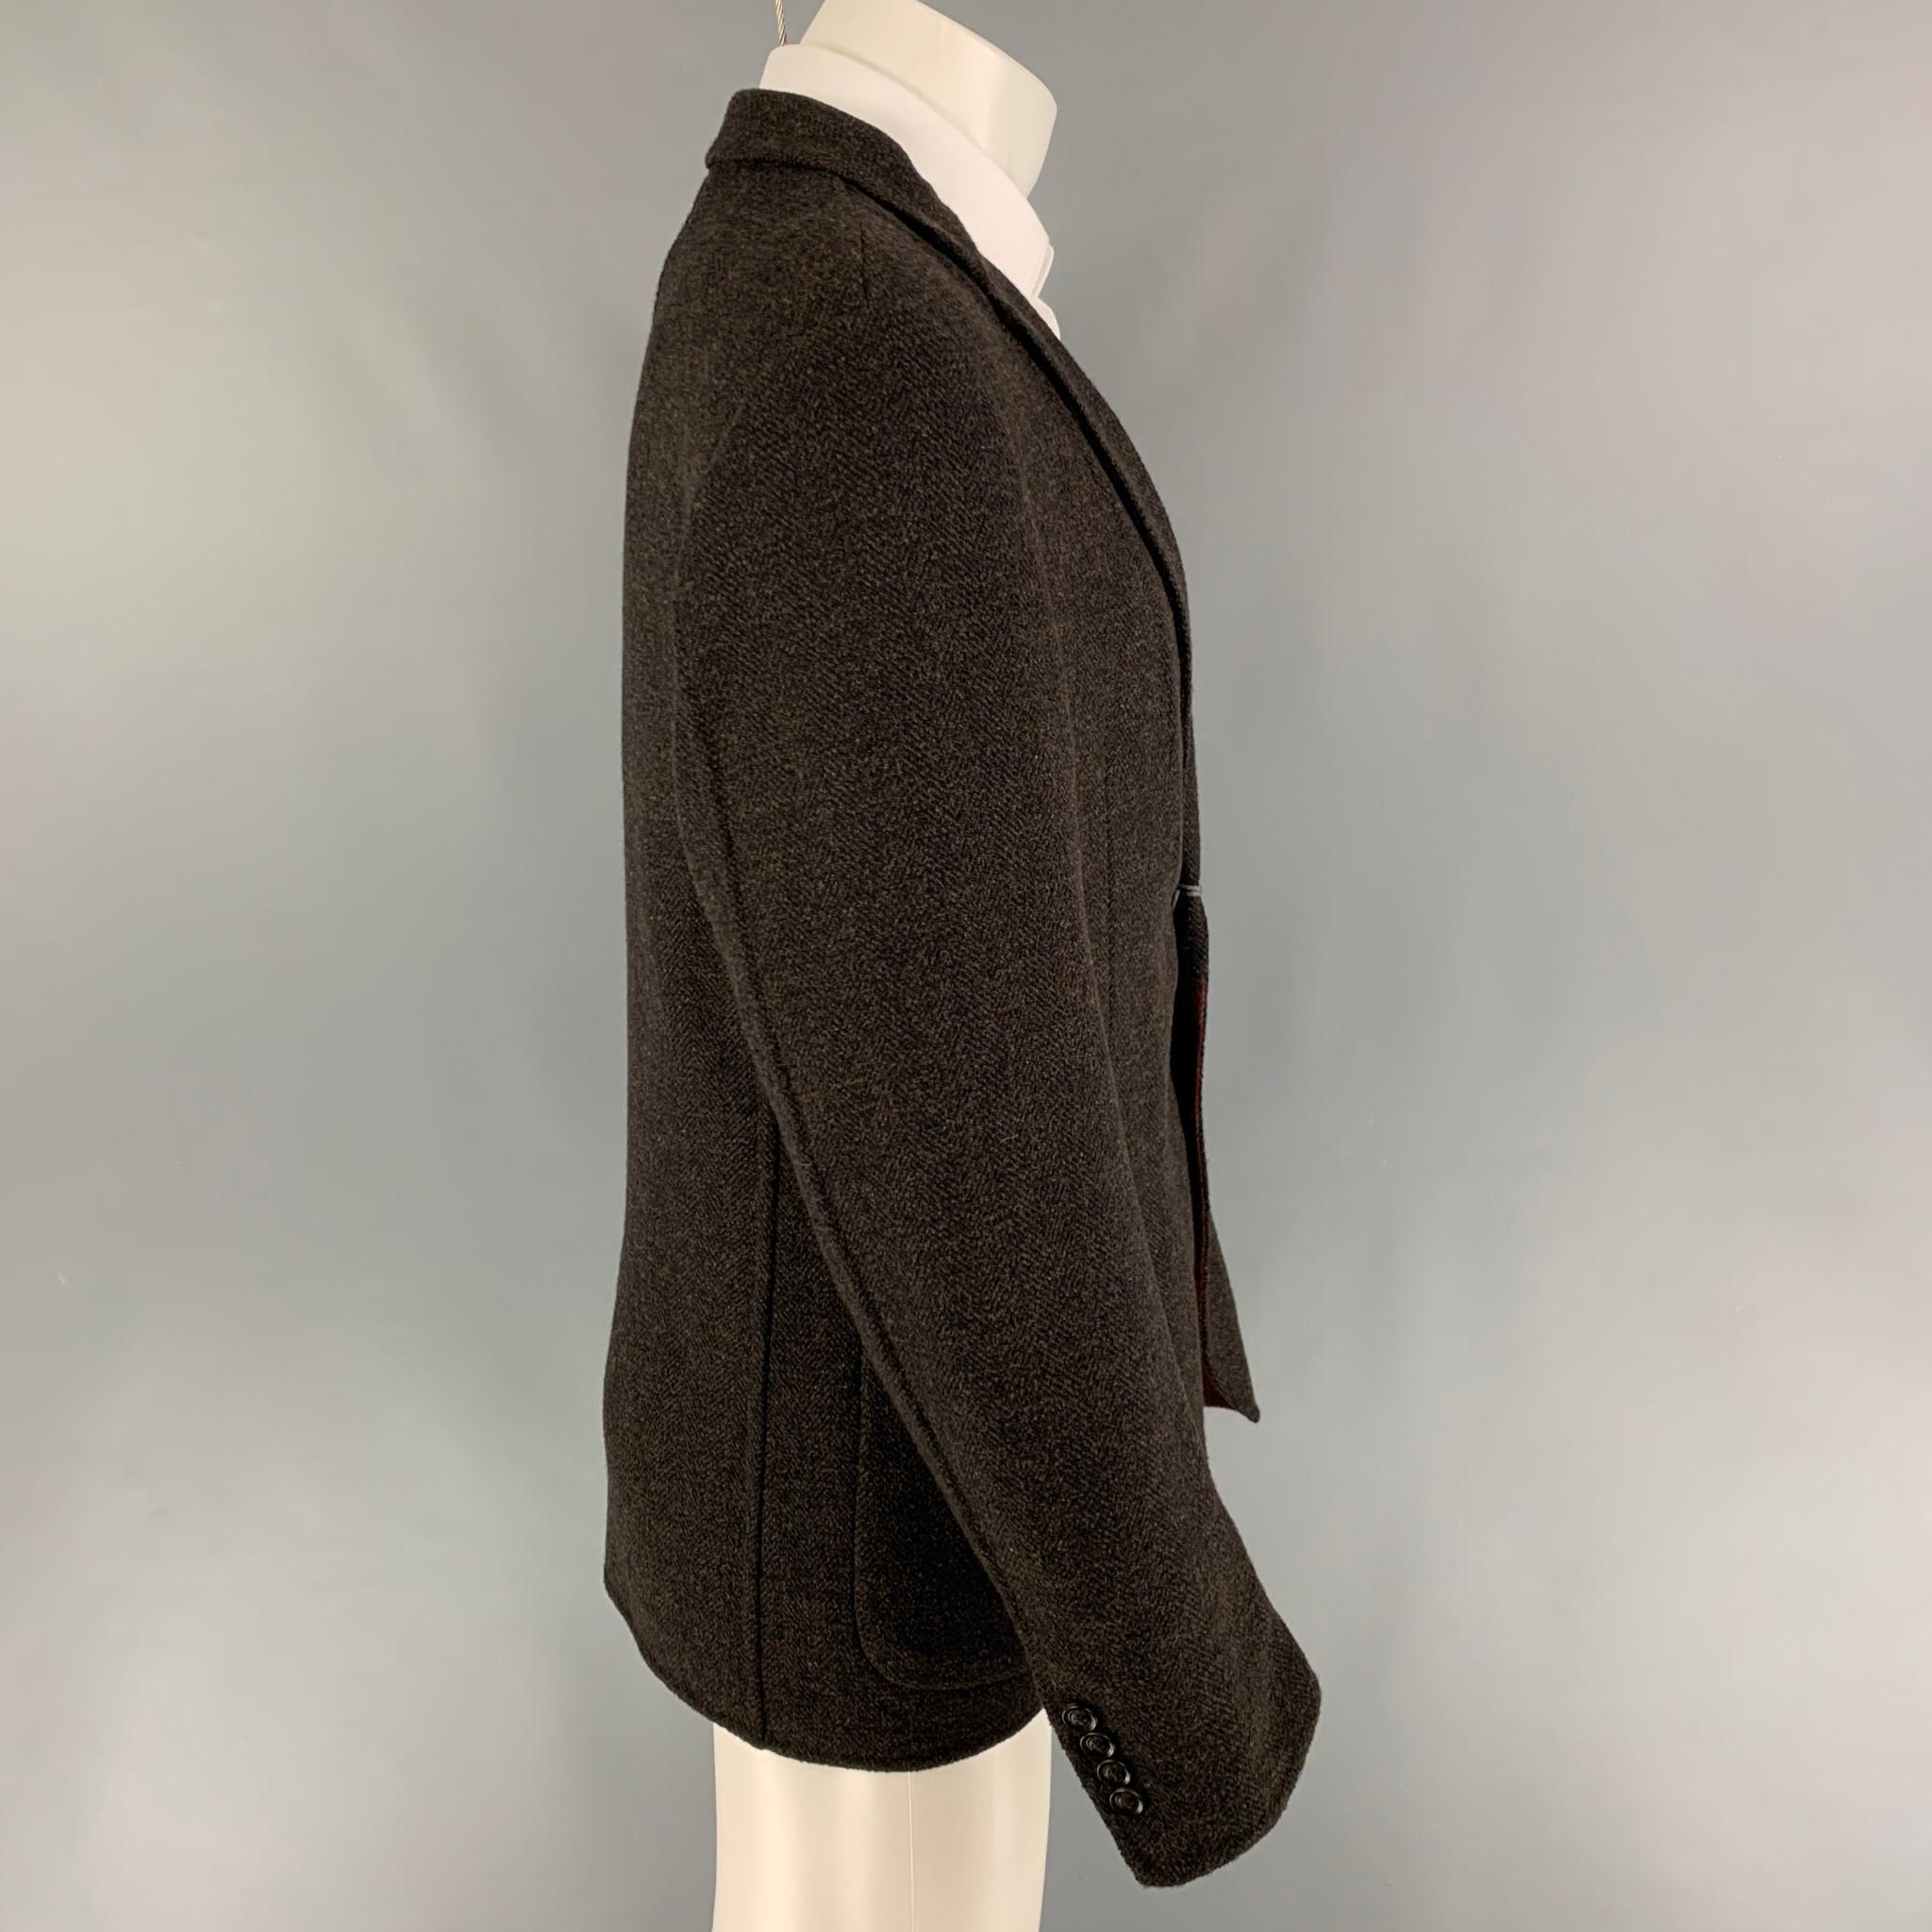 ERMENEGILDO ZEGNA sport coat comes in a brown & black herringbone wool blend featuring a notch lapel, patch pockets, single back vent, and a double button closure. 

New With Tags. 
Marked: 50

Measurements:

Shoulder: 18 in.
Chest: 40 in.
Sleeve: